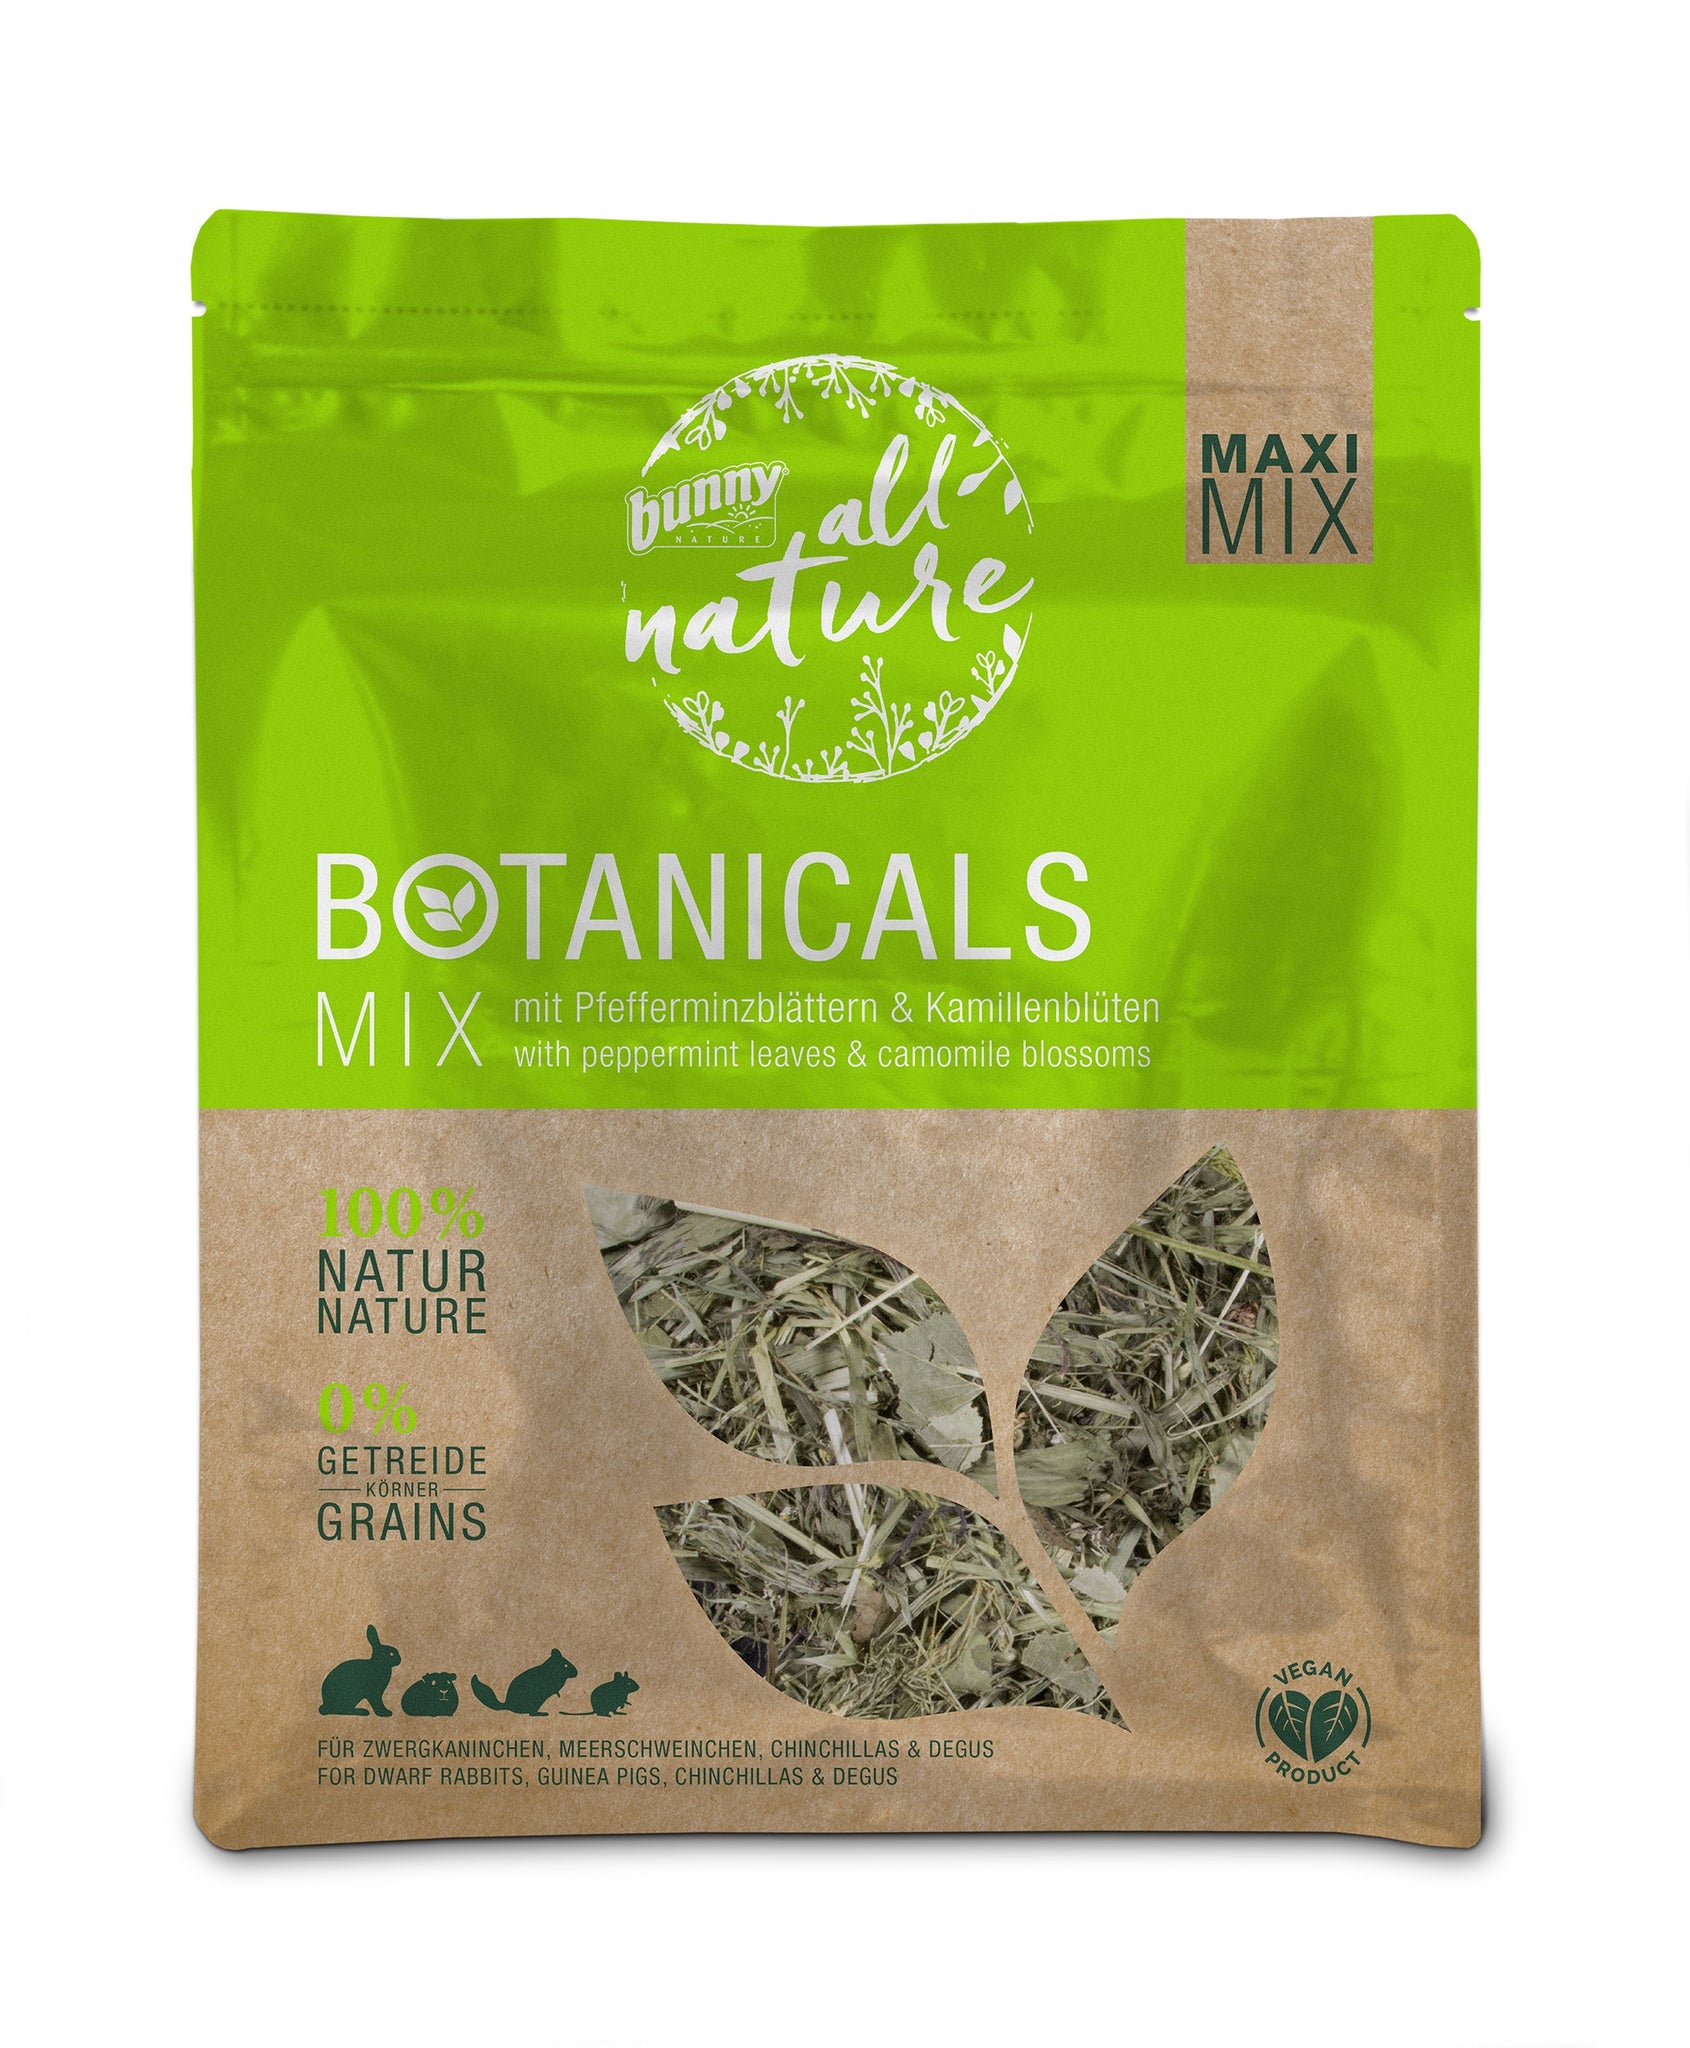 Botanicals Maxi Mix Peppermint Leaves and Camomile Blossoms 400g